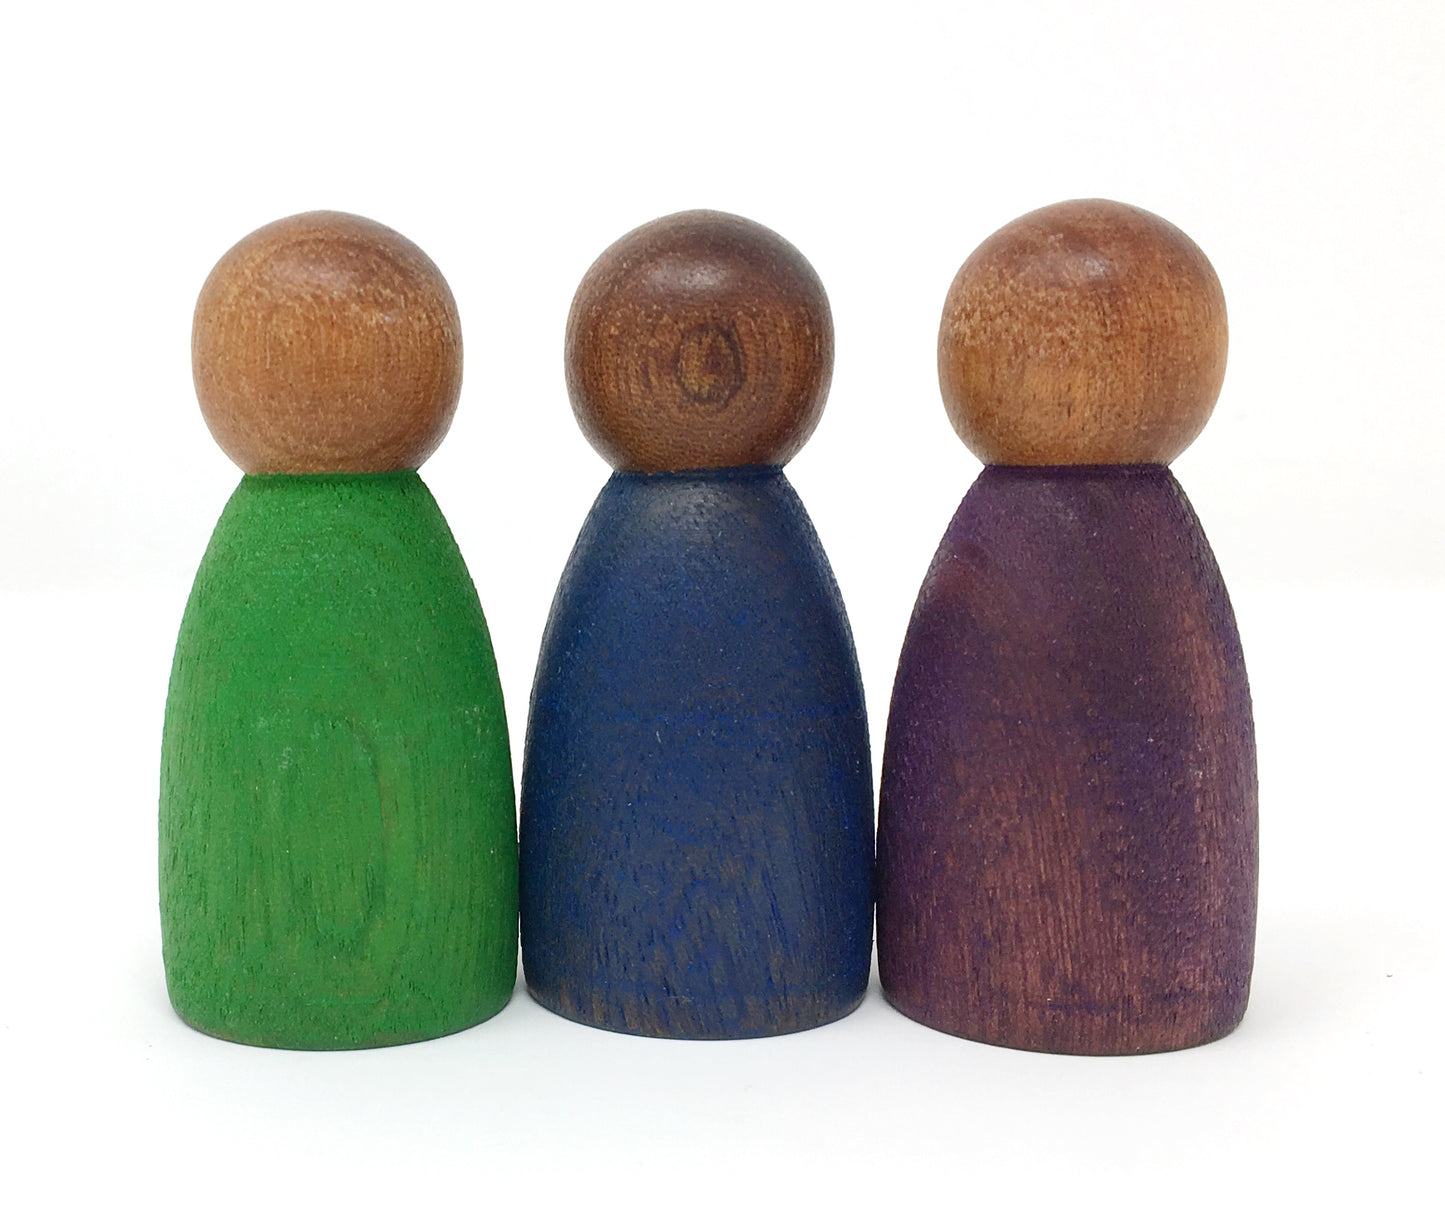 Three wooden peg people, one painted green, one blue, and one purple, from left to right